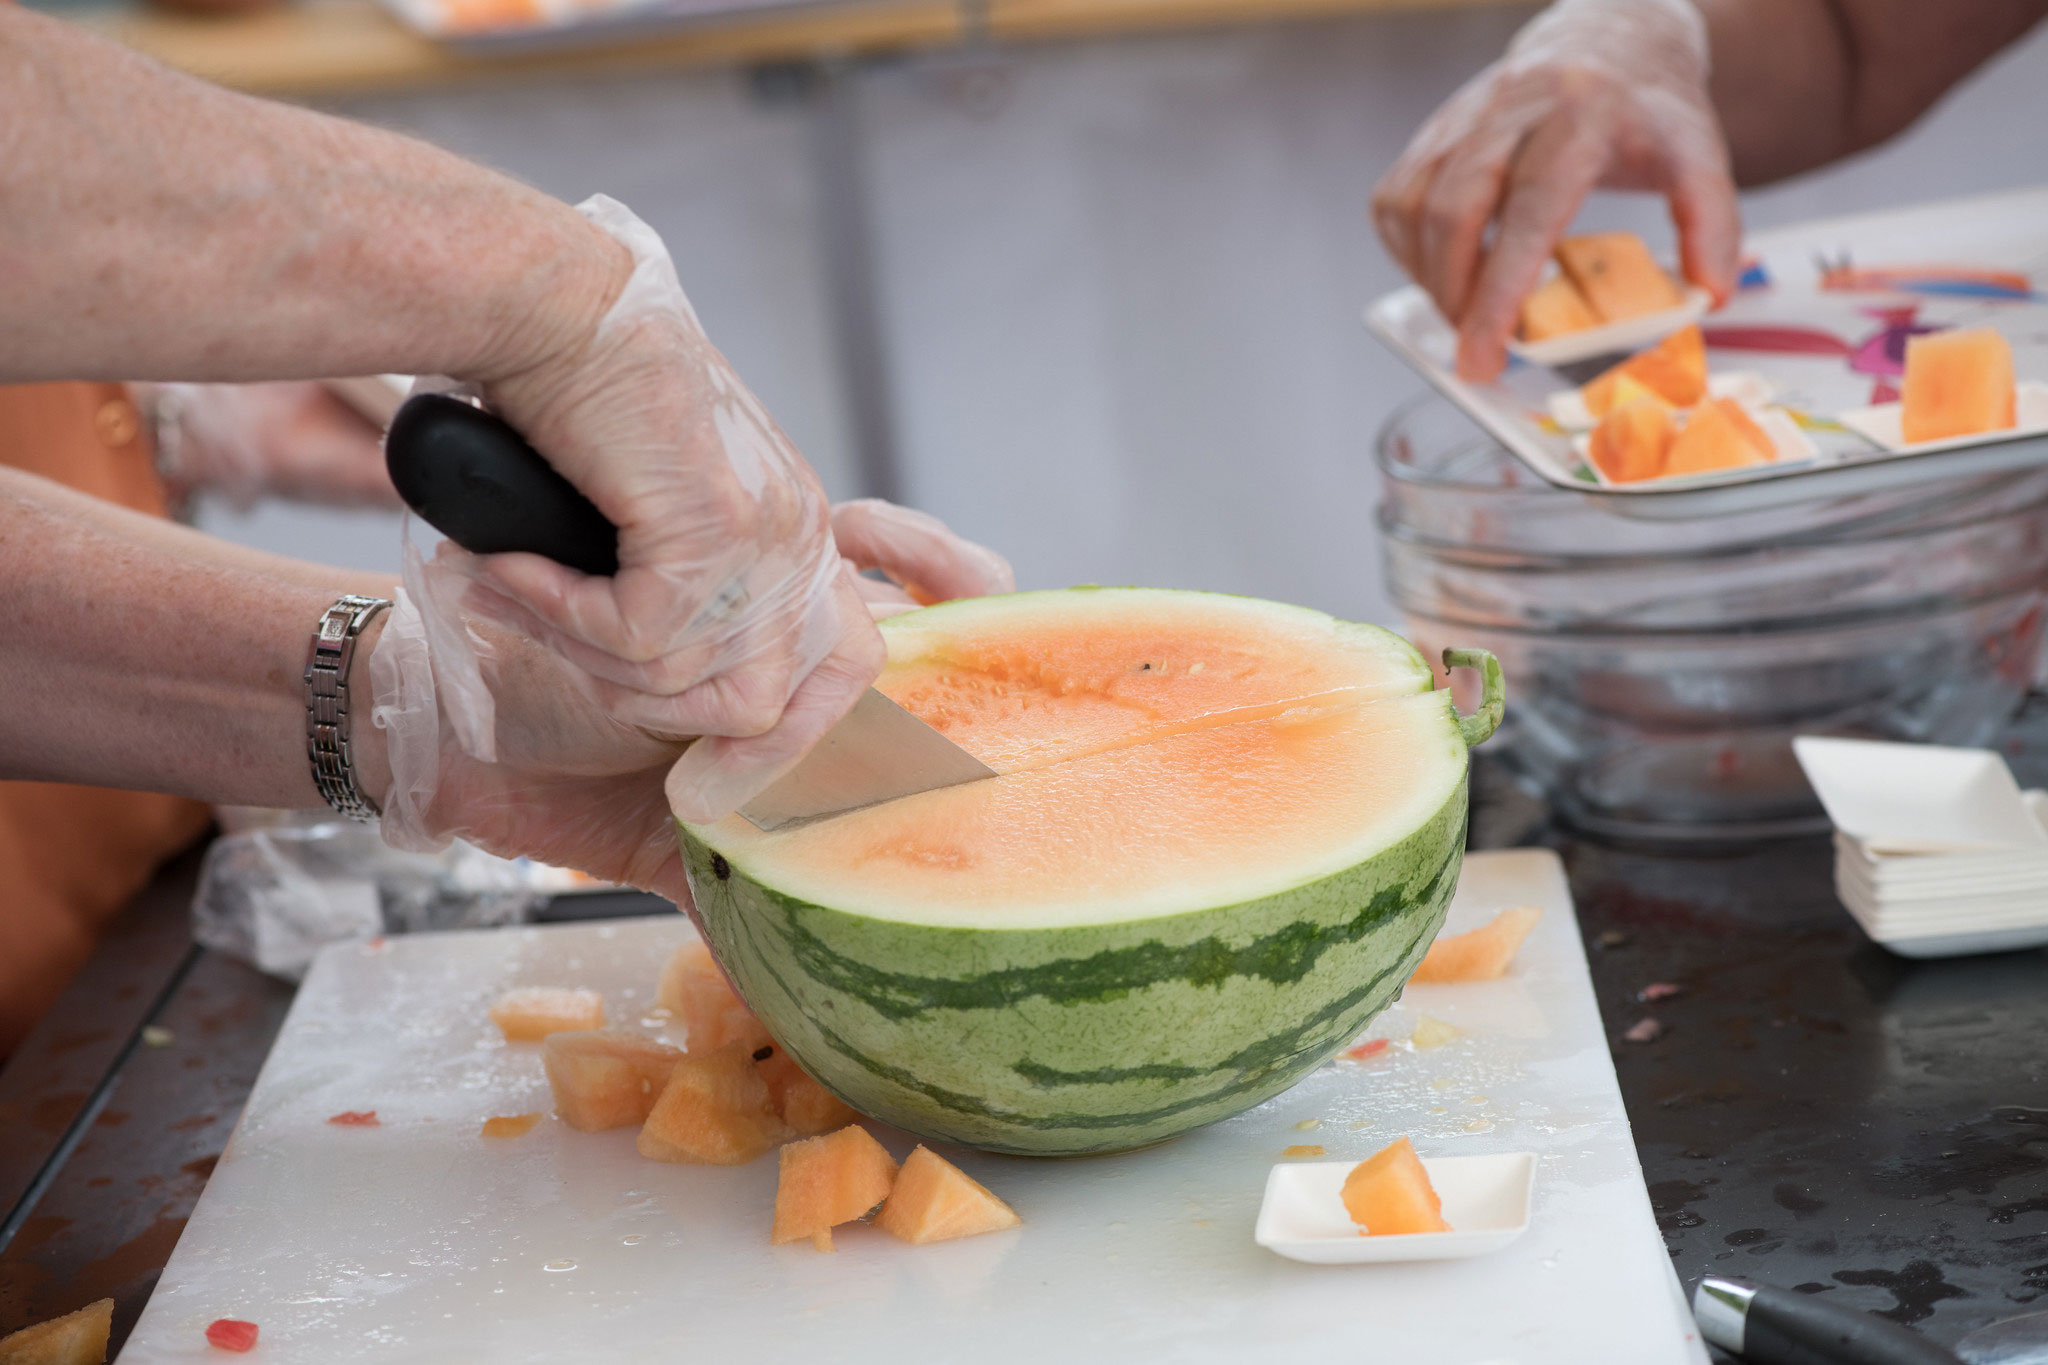 Hands wearing plastic gloves cutting watermelon samples on a white cutting board.